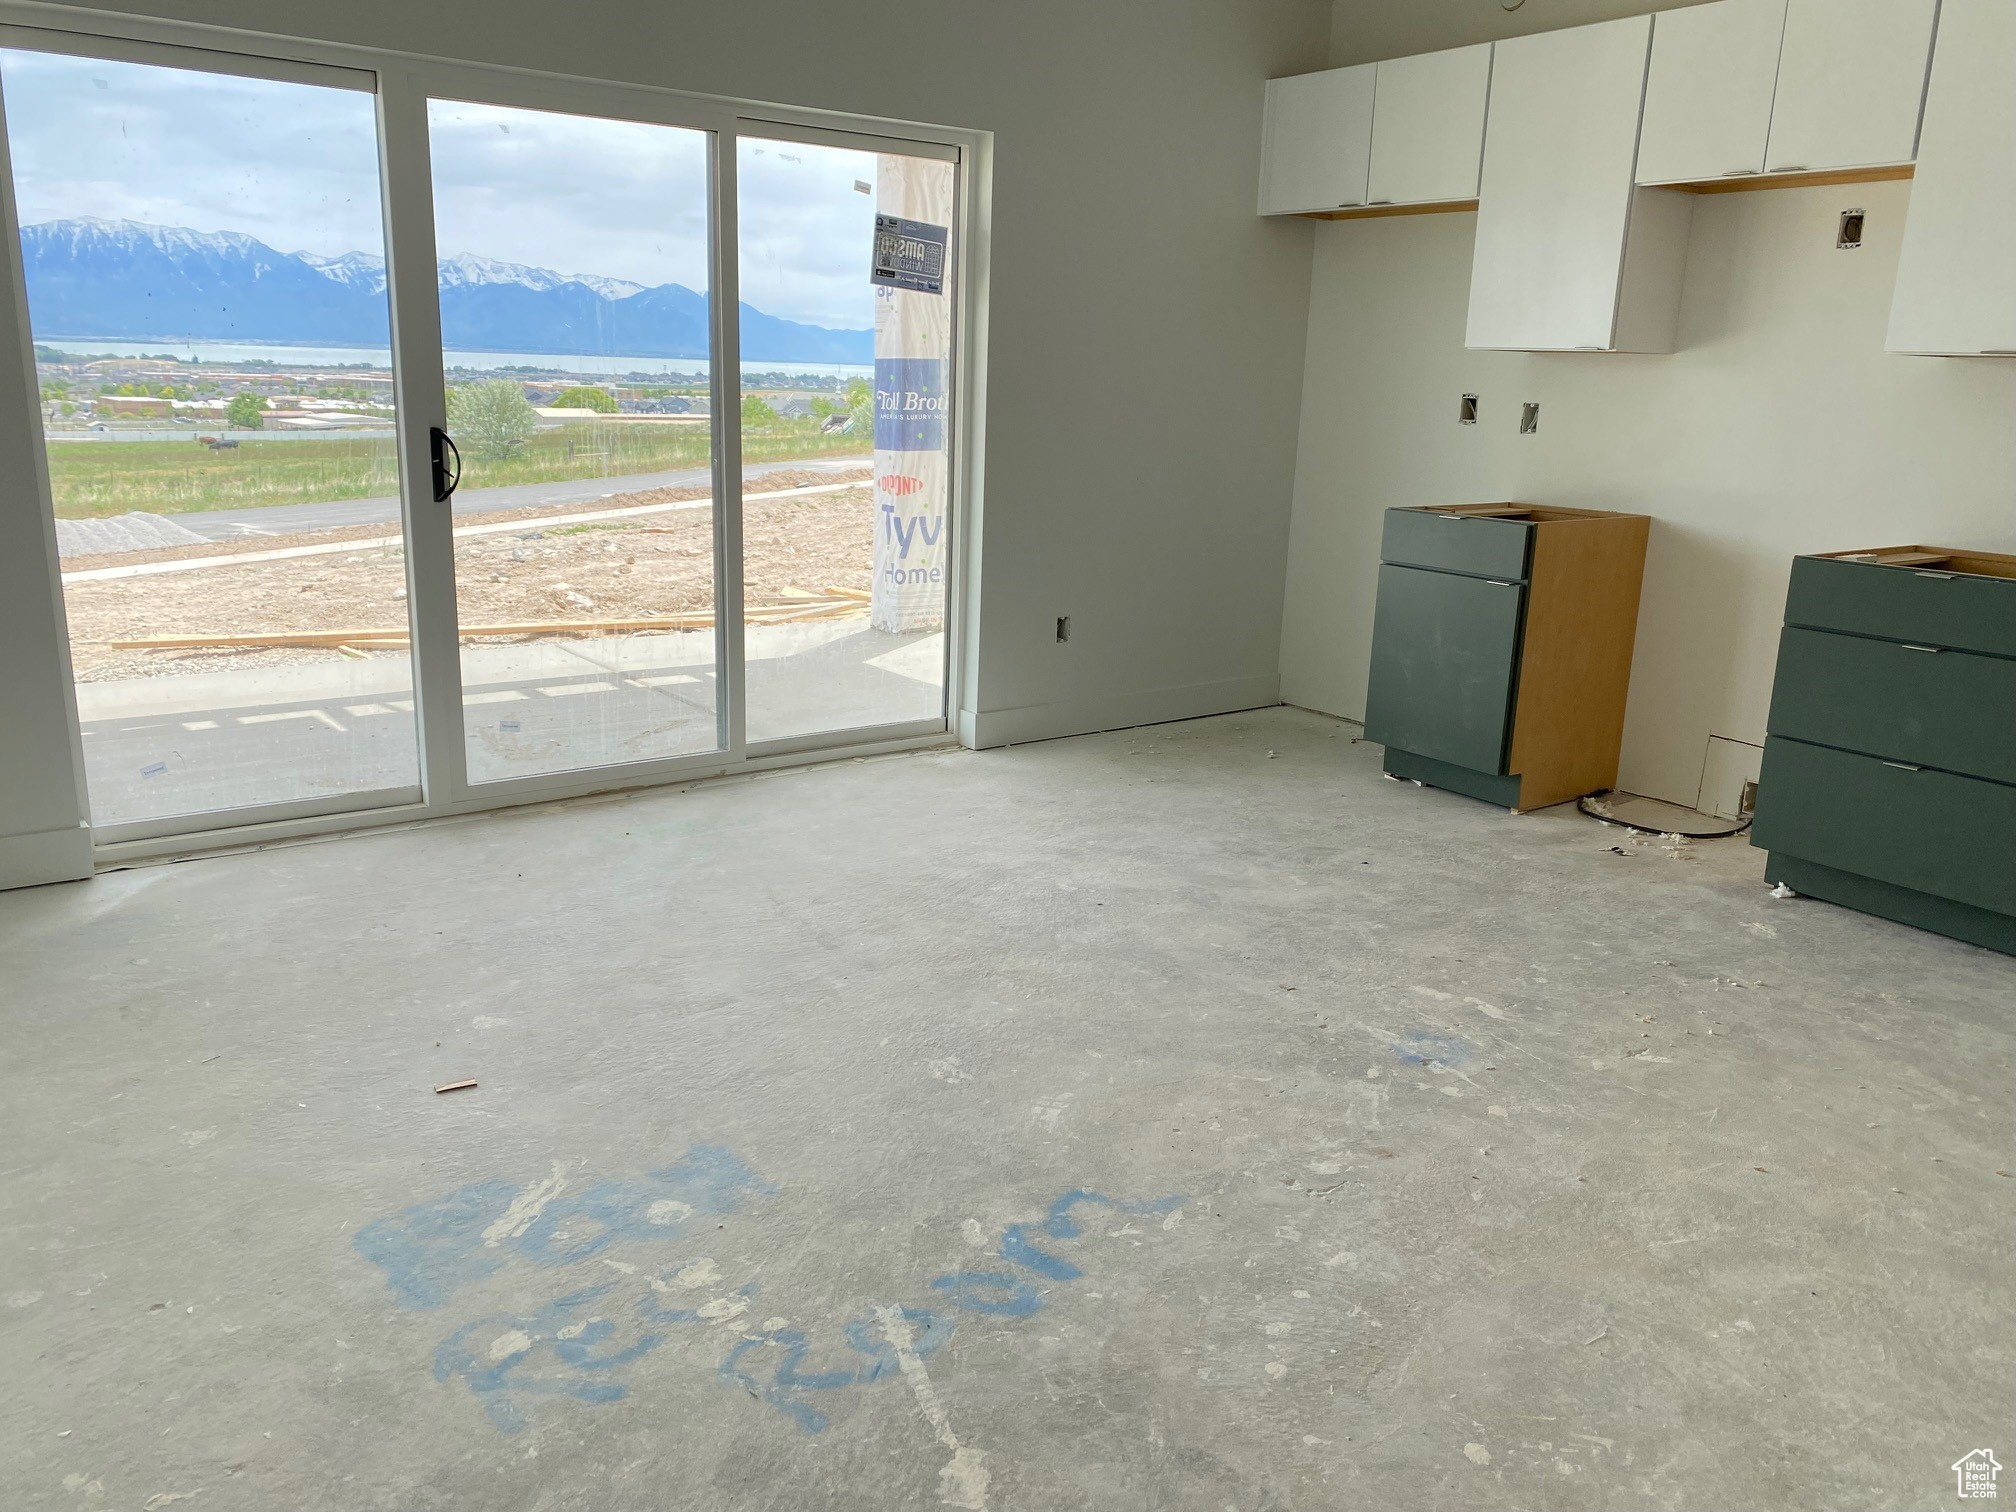 Walkout Basement with Kitchen and Views